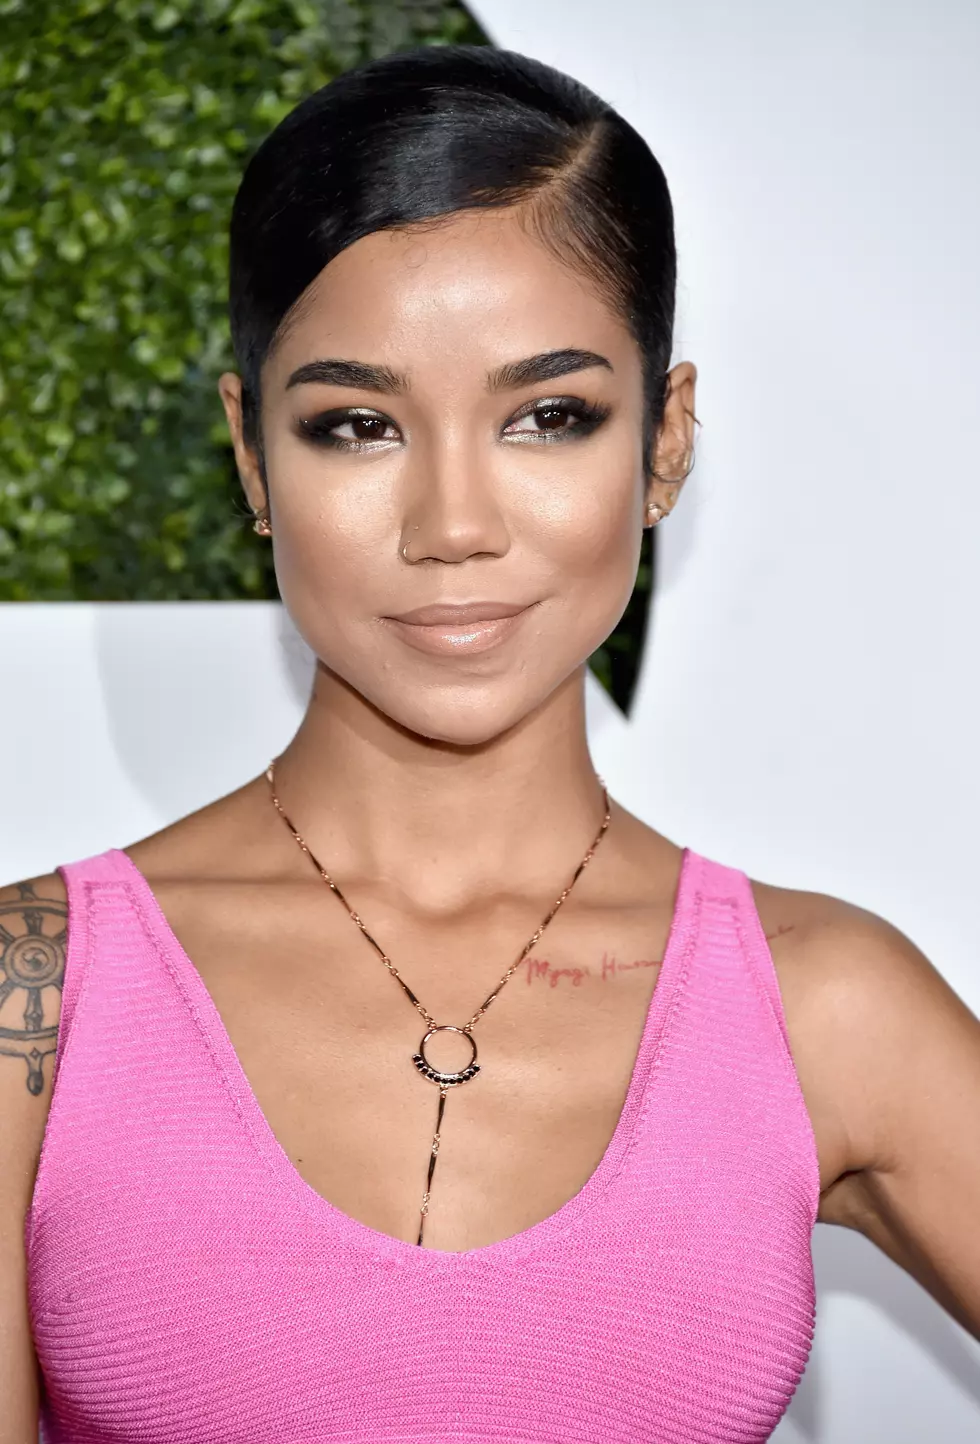 Check Out Jhene Aiko’s New Single ‘B’S & H’S’